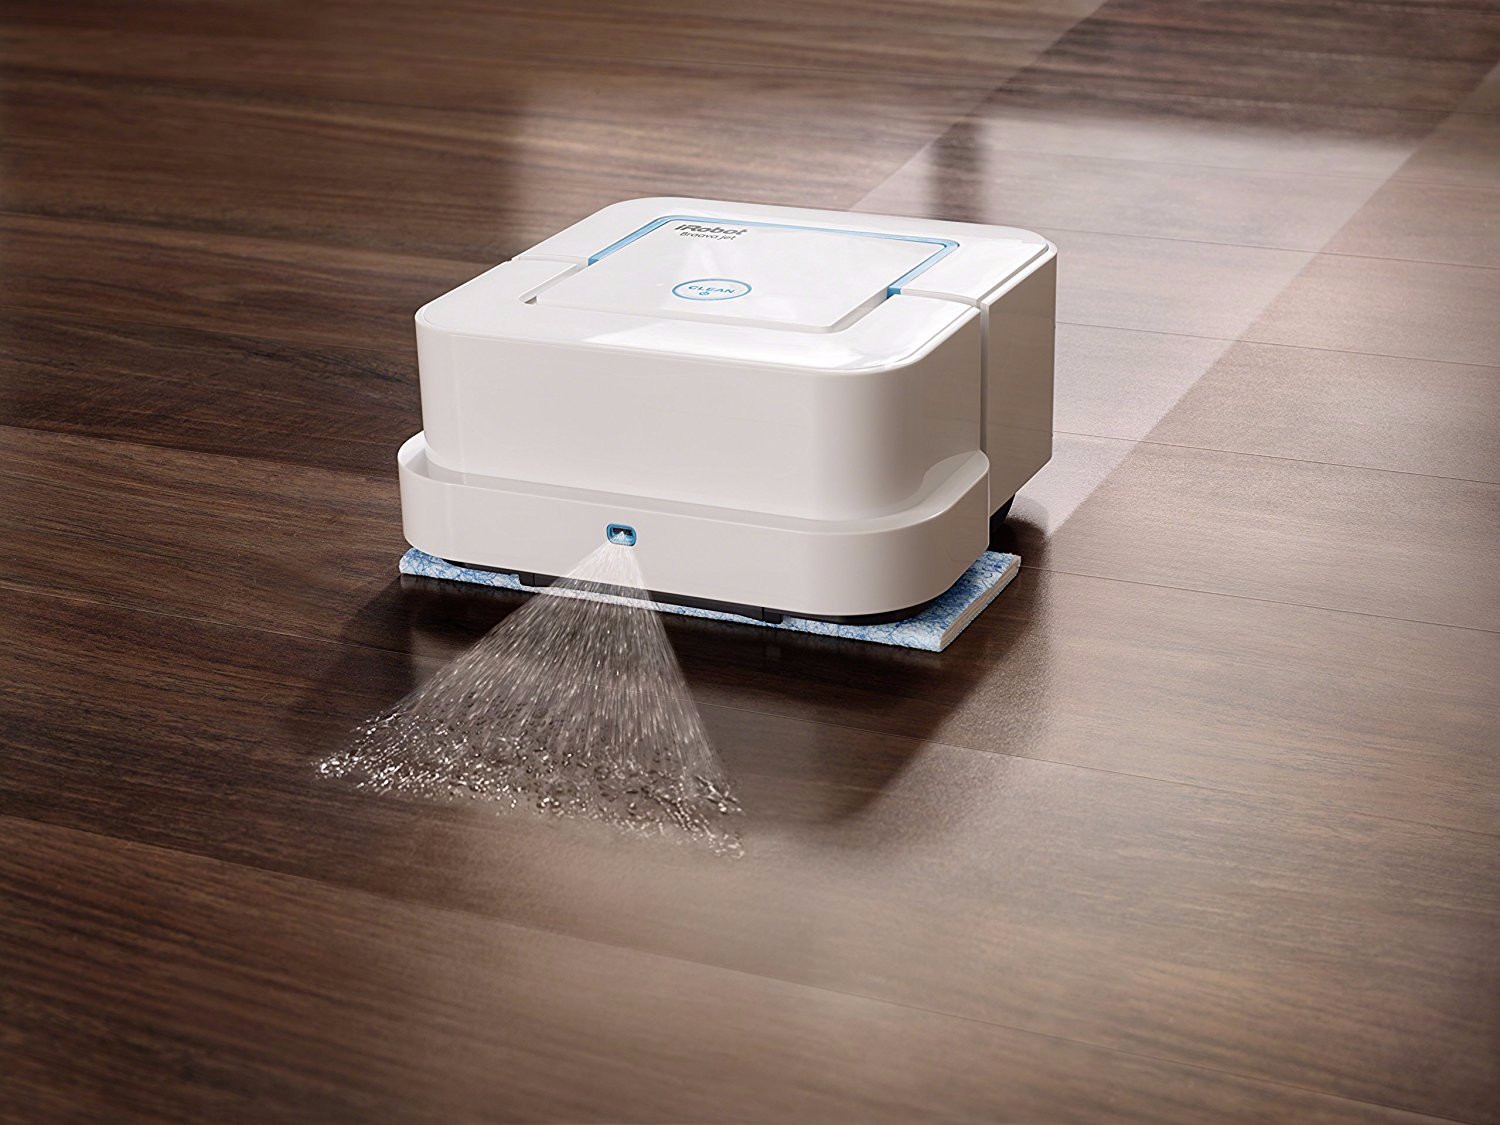 29 attractive Hardwood Floor Cleaning Service Cost 2024 free download hardwood floor cleaning service cost of 12 smart home gadgets that practically clean the house for you with regard to keep scrolling to see how you can make your life a lot easier with these